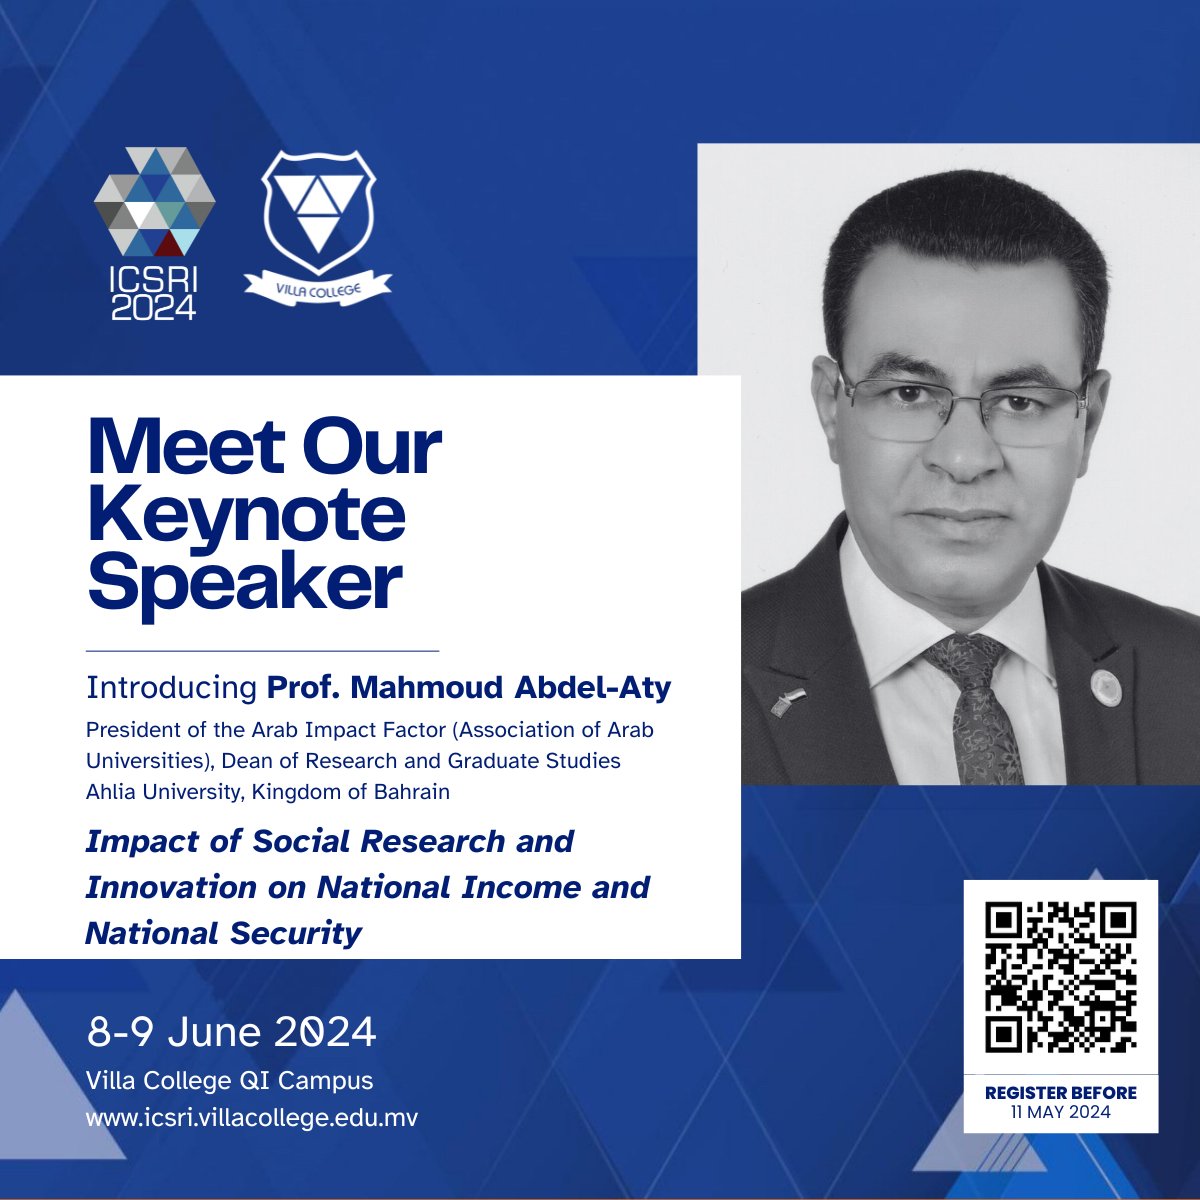 Introducing #ICSRI2024 Keynote Speaker, Prof. Mahmoud Abdel-Aty Prof. Mahmoud Abdel-Aty completed his doctorate in quantum optics at Max-Planck-Institute for Quantum Optics, Munch, Germany, in 1999 and received the D. Sc. (Doctor of Science) in 2007. His significant…